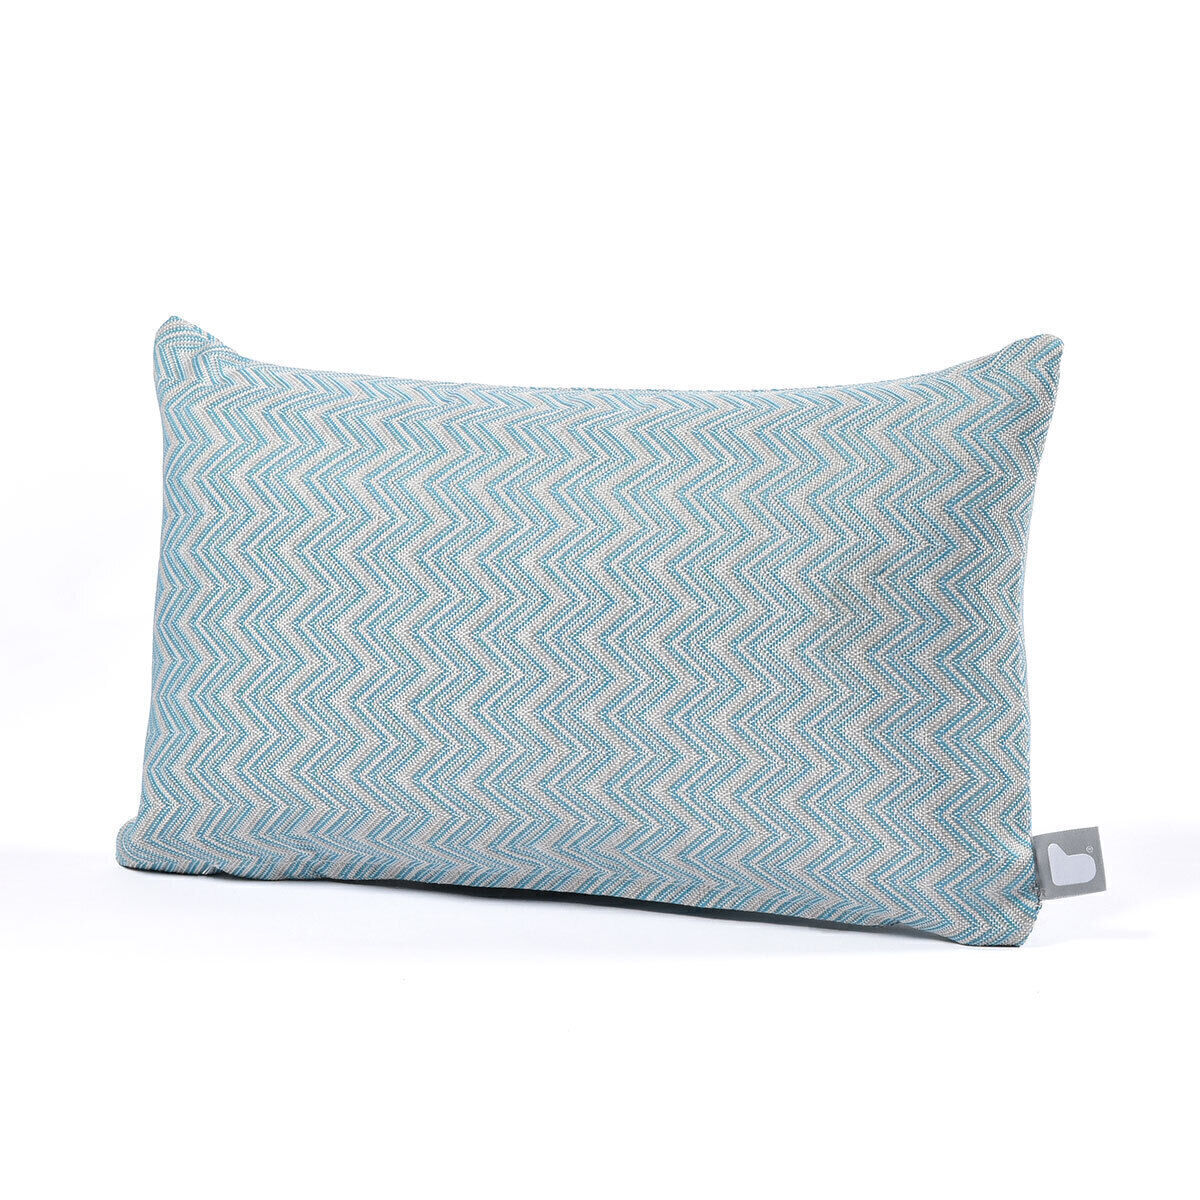 Maze - Pair of Outdoor Bolster Cushions (30x50cm) - Polines Blue product image